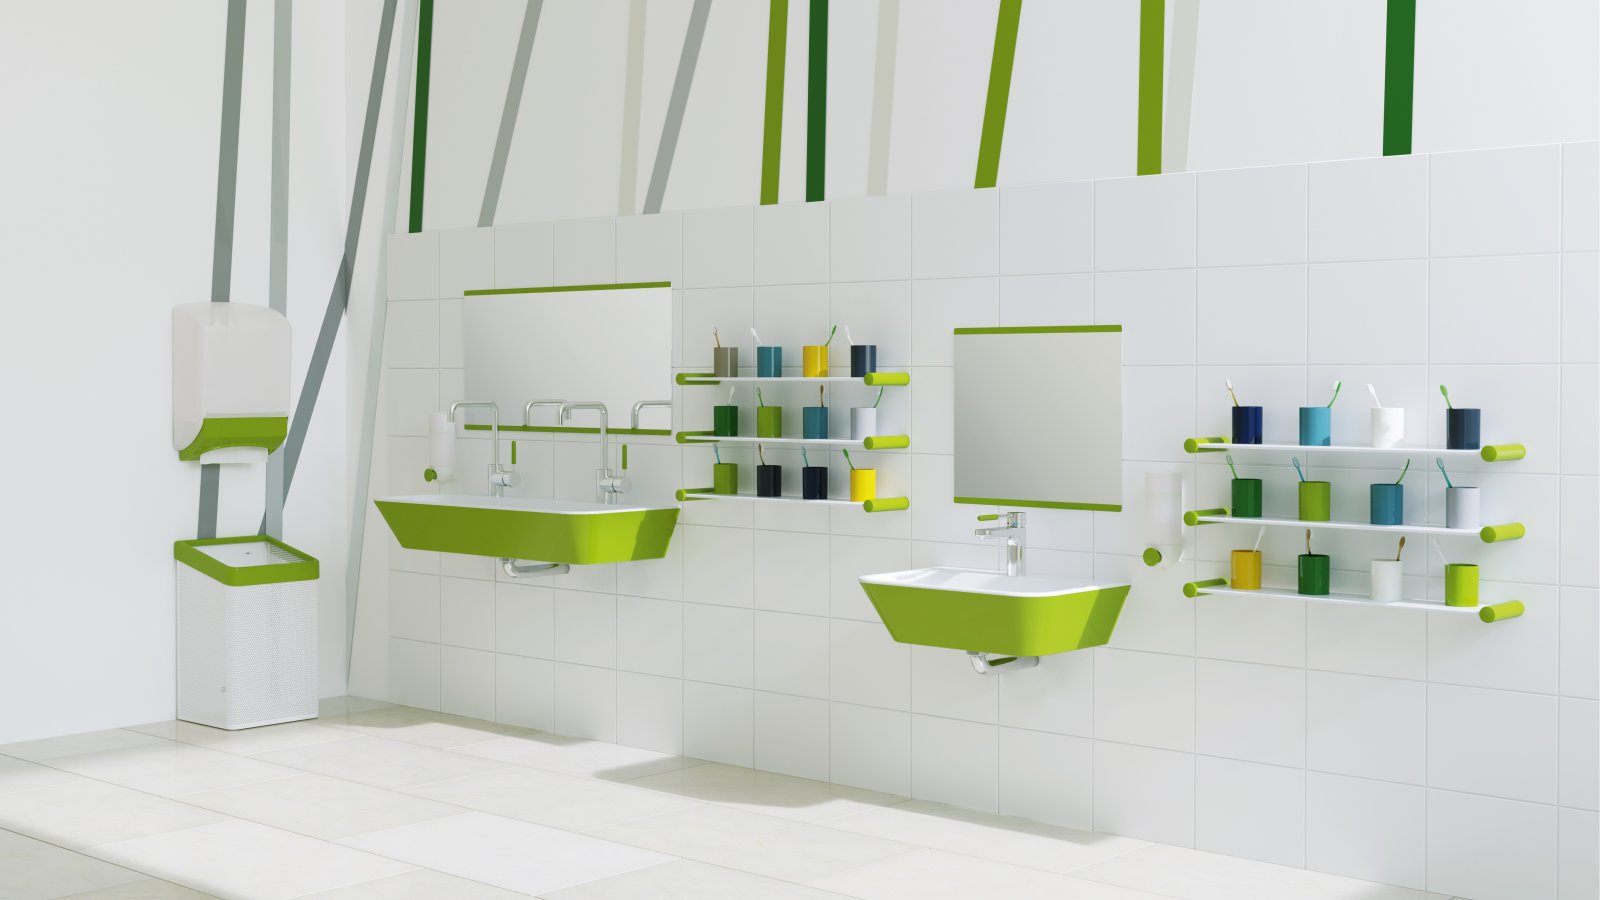 Child-friendly washbasin with green accents; two washbasins at different heights next to colourful toothbrush holders